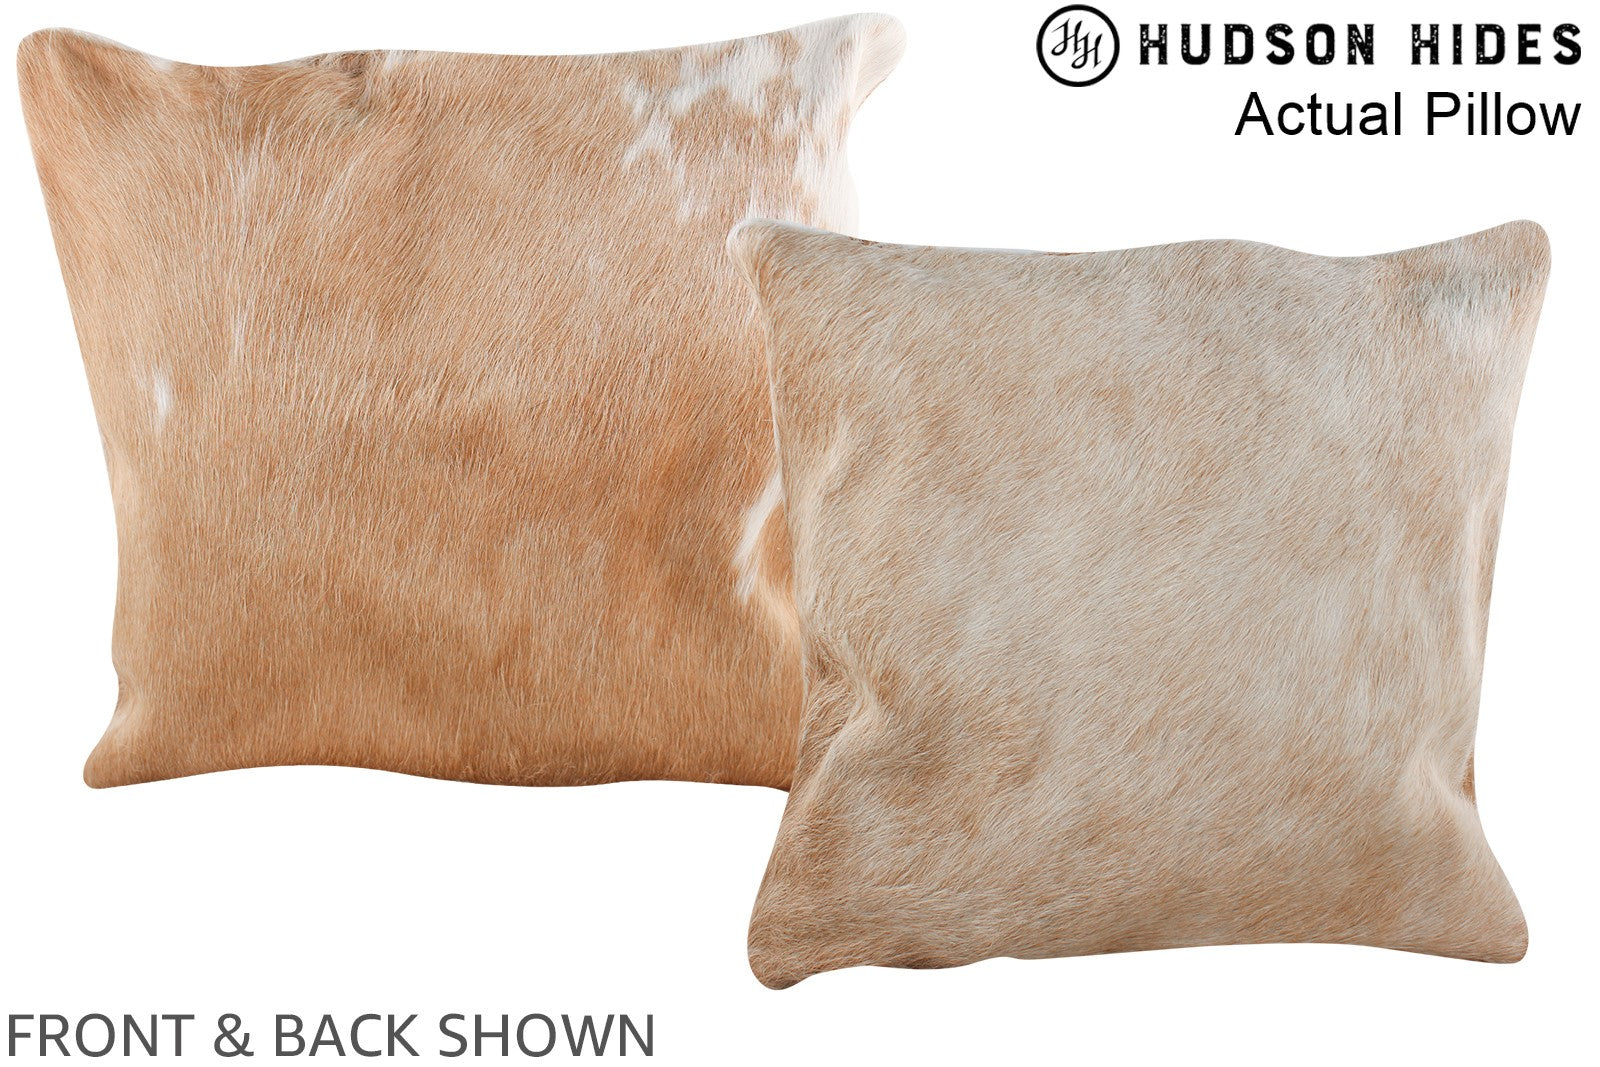 Beige and White Cowhide Pillow #A13956